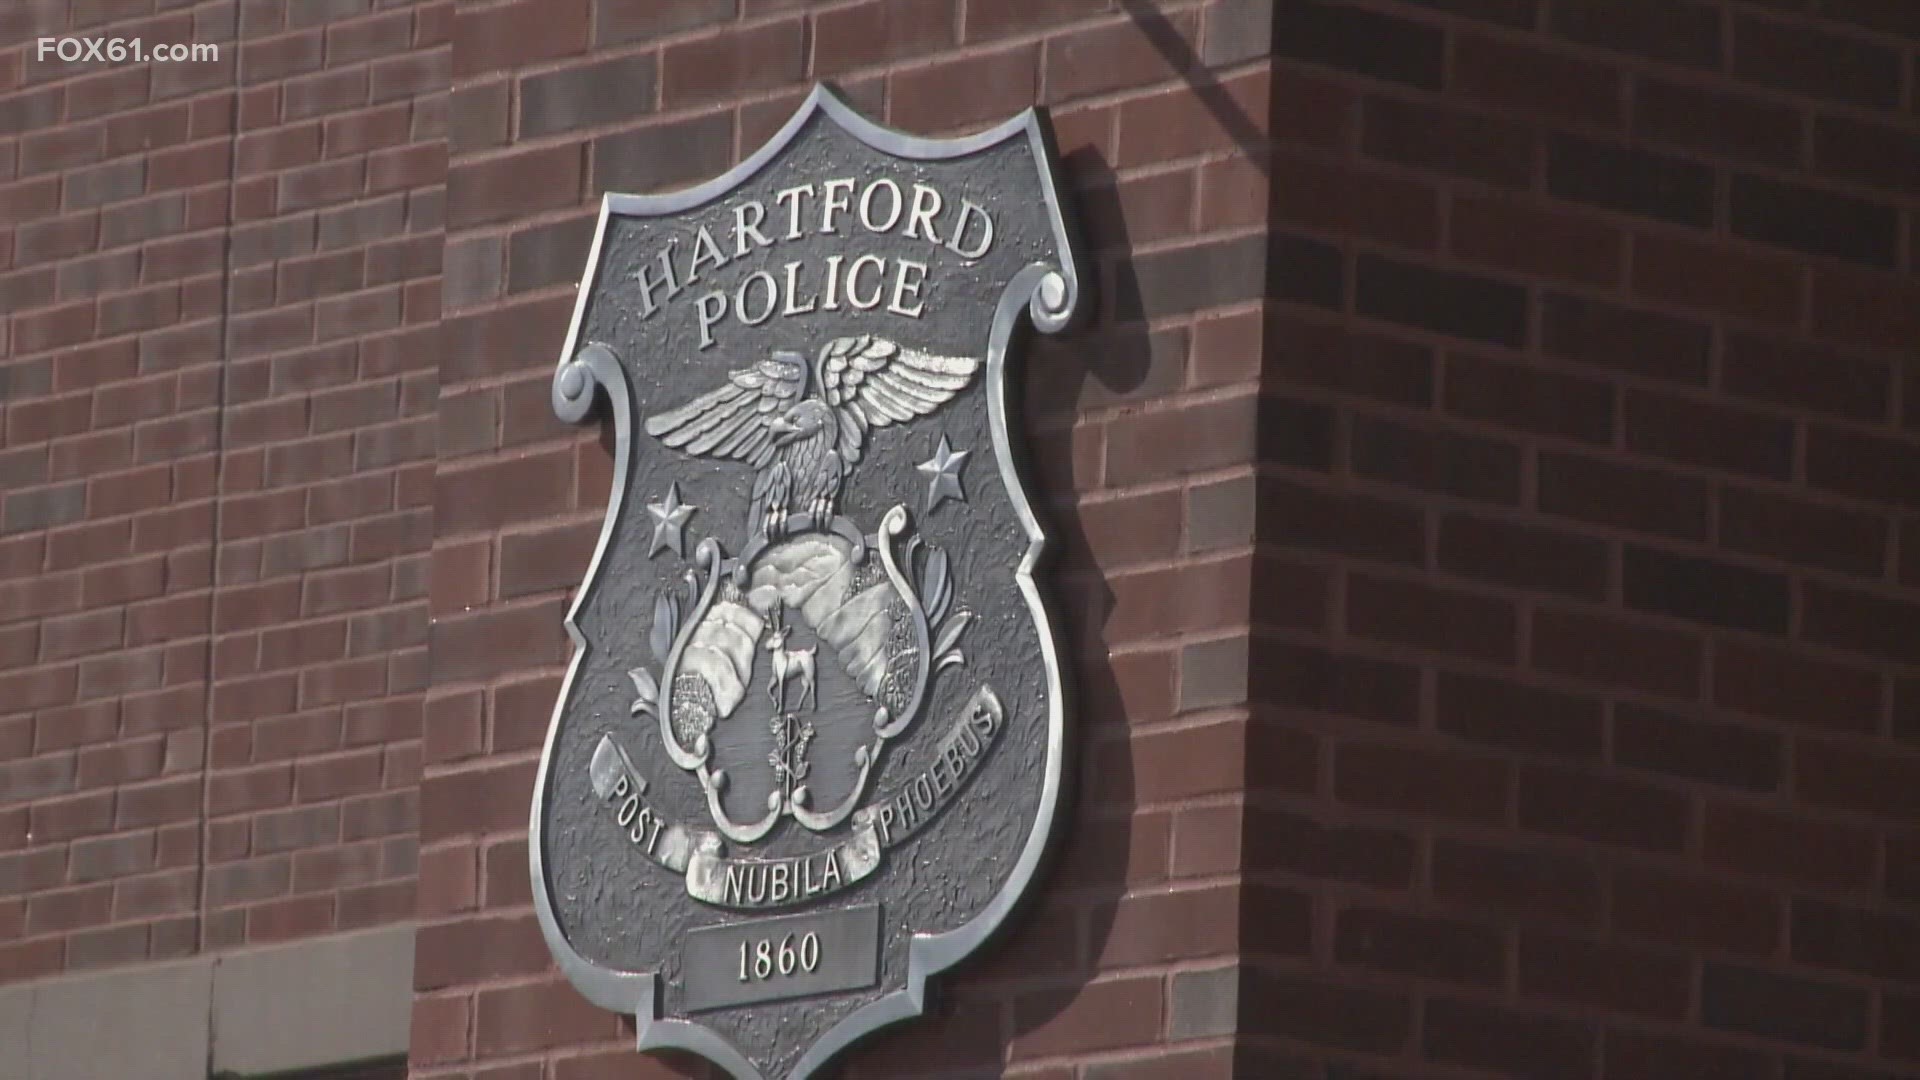 During a 4 week period, a Hartford officer over-reported over 195 traffic stops.